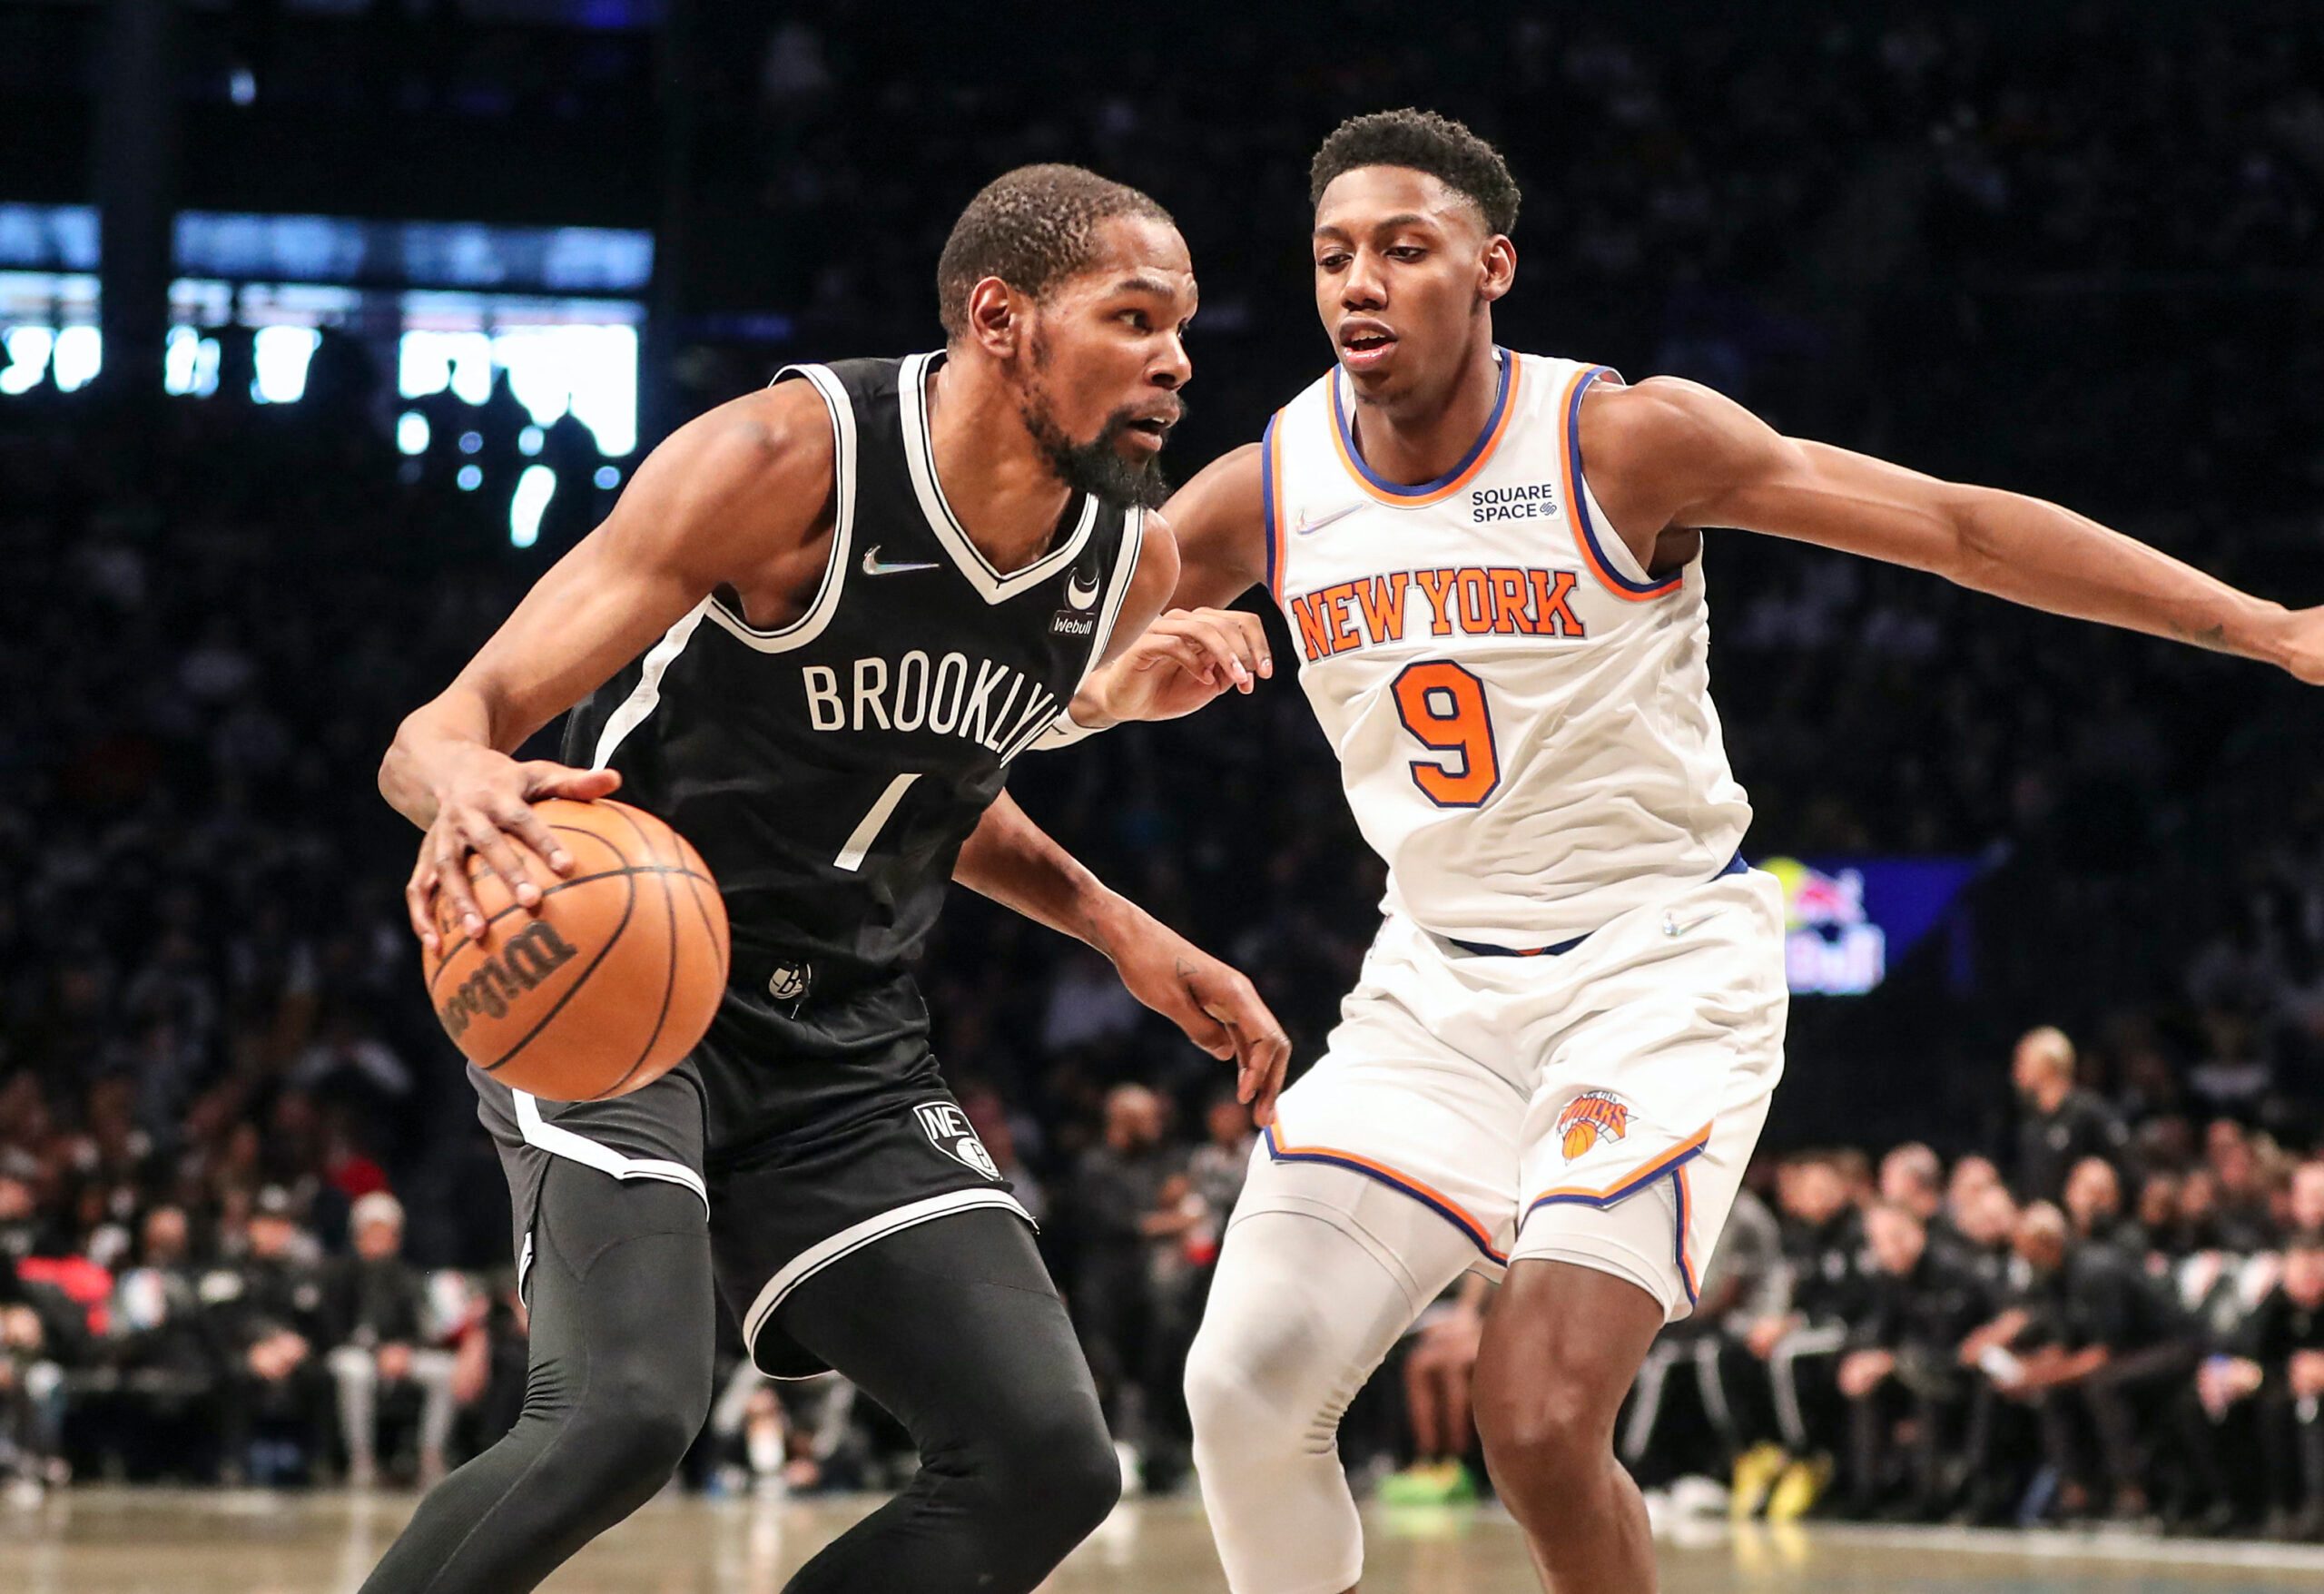 Durant drops 53, nails clutch 3 as Nets top Knicks